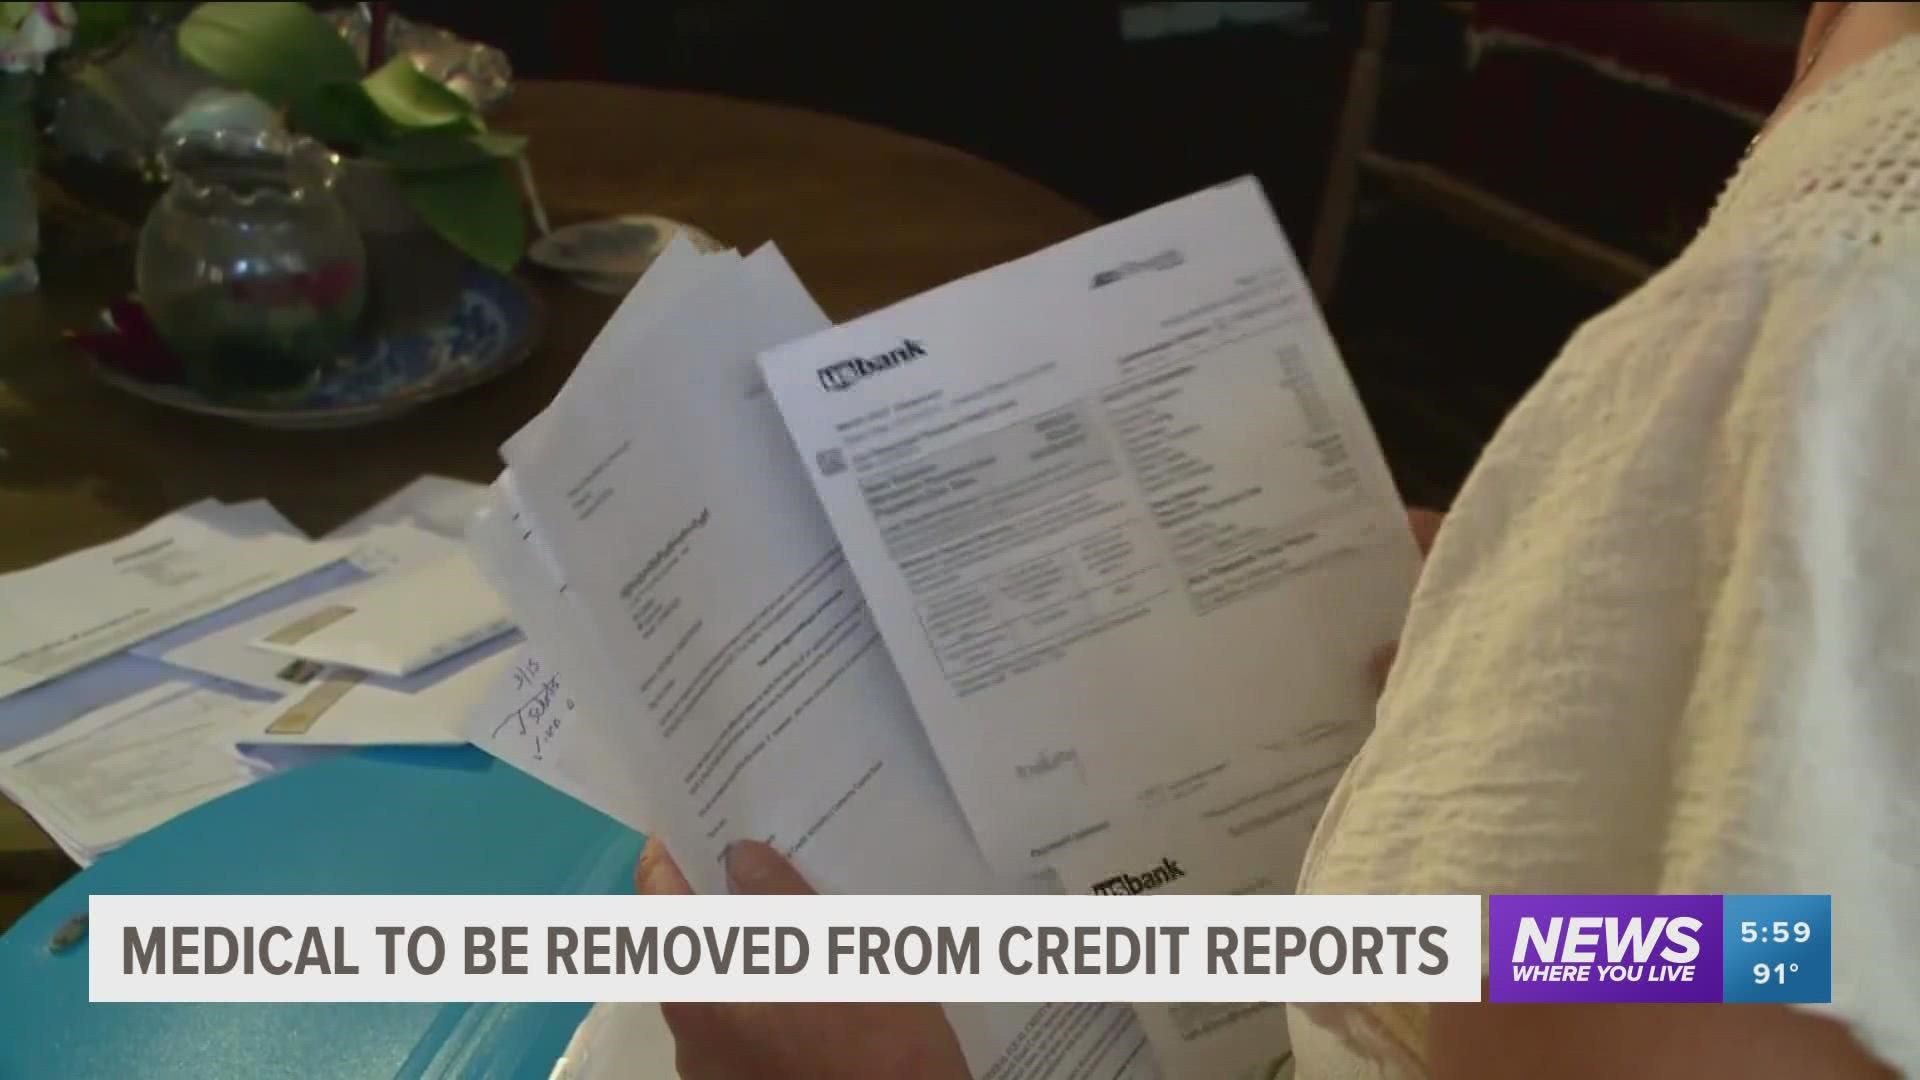 Equifax, Experian and Trans-Union will begin the process of permanently removing 70% of medical debt from credit reports starting on June 31.